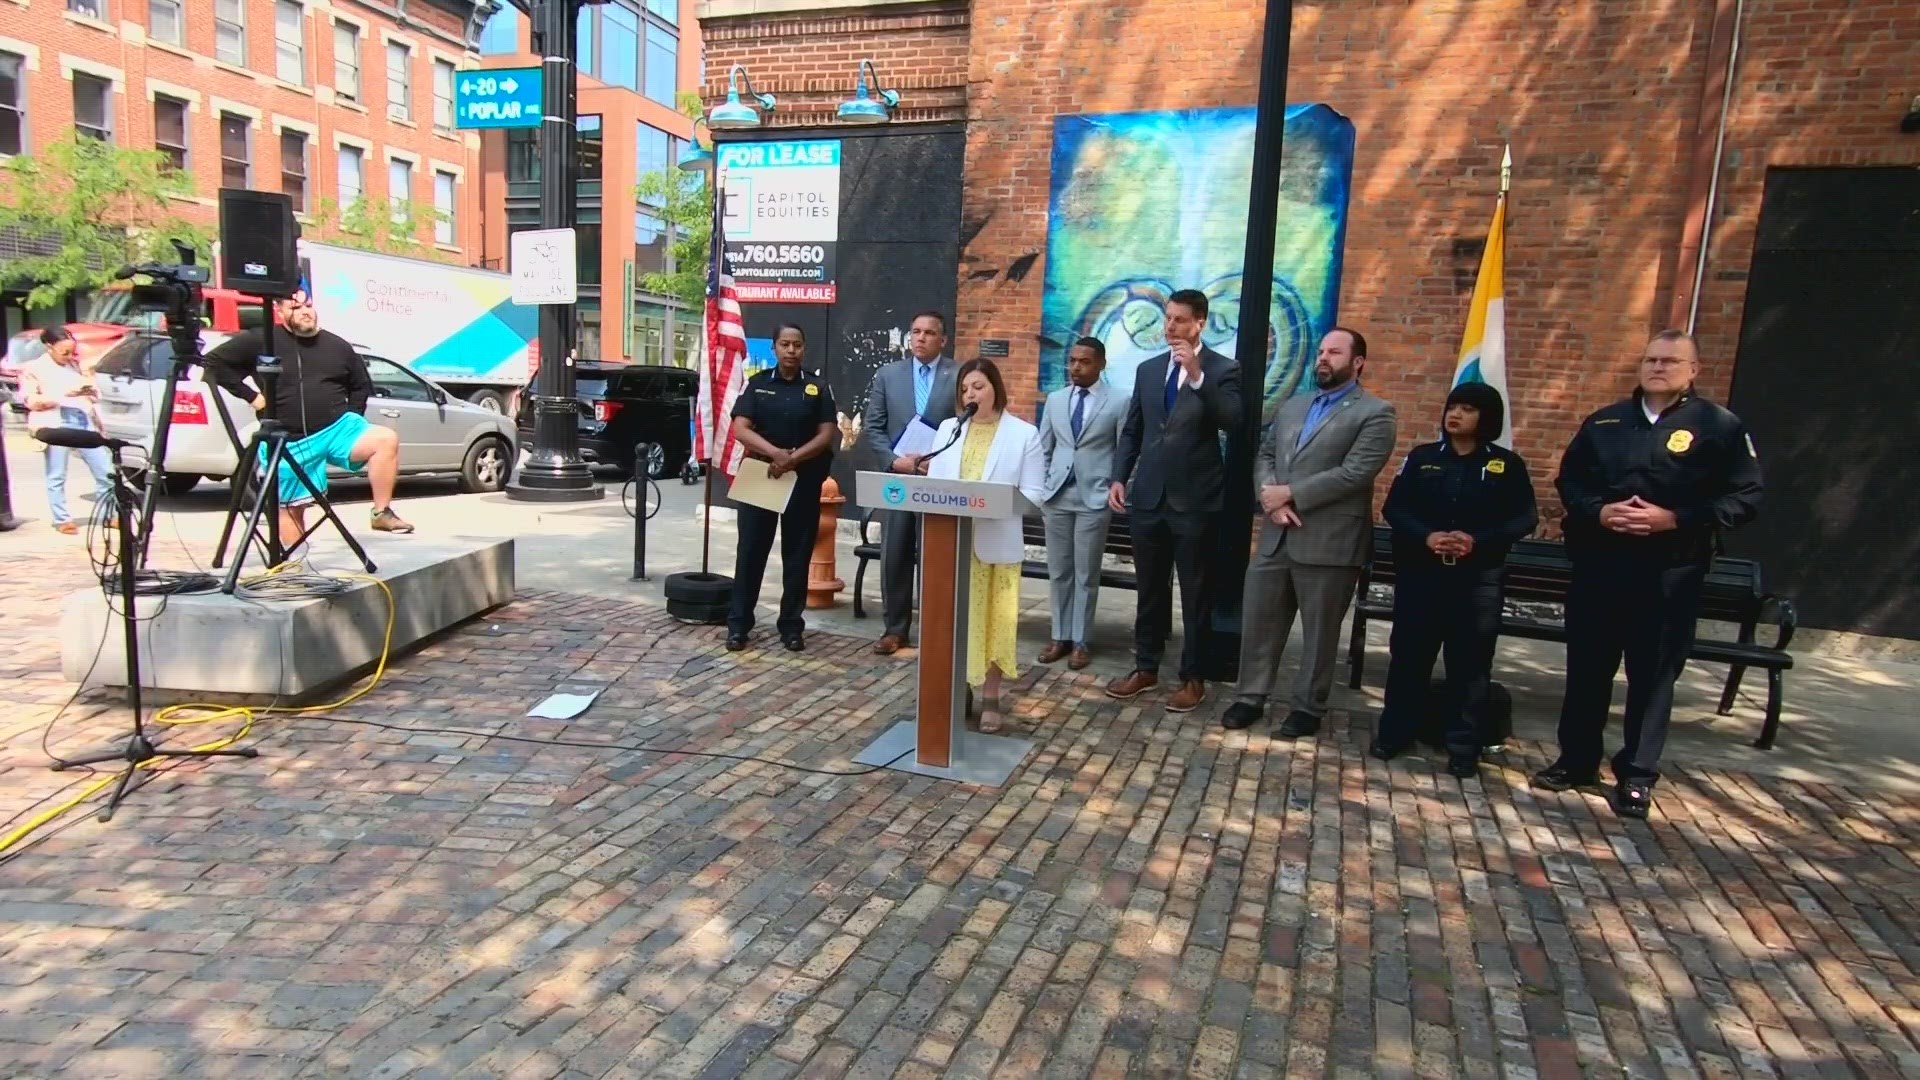 Columbus Mayor Andrew Ginther on Thursday announced a voluntary curfew for businesses in the Short North this weekend after recent shootings.